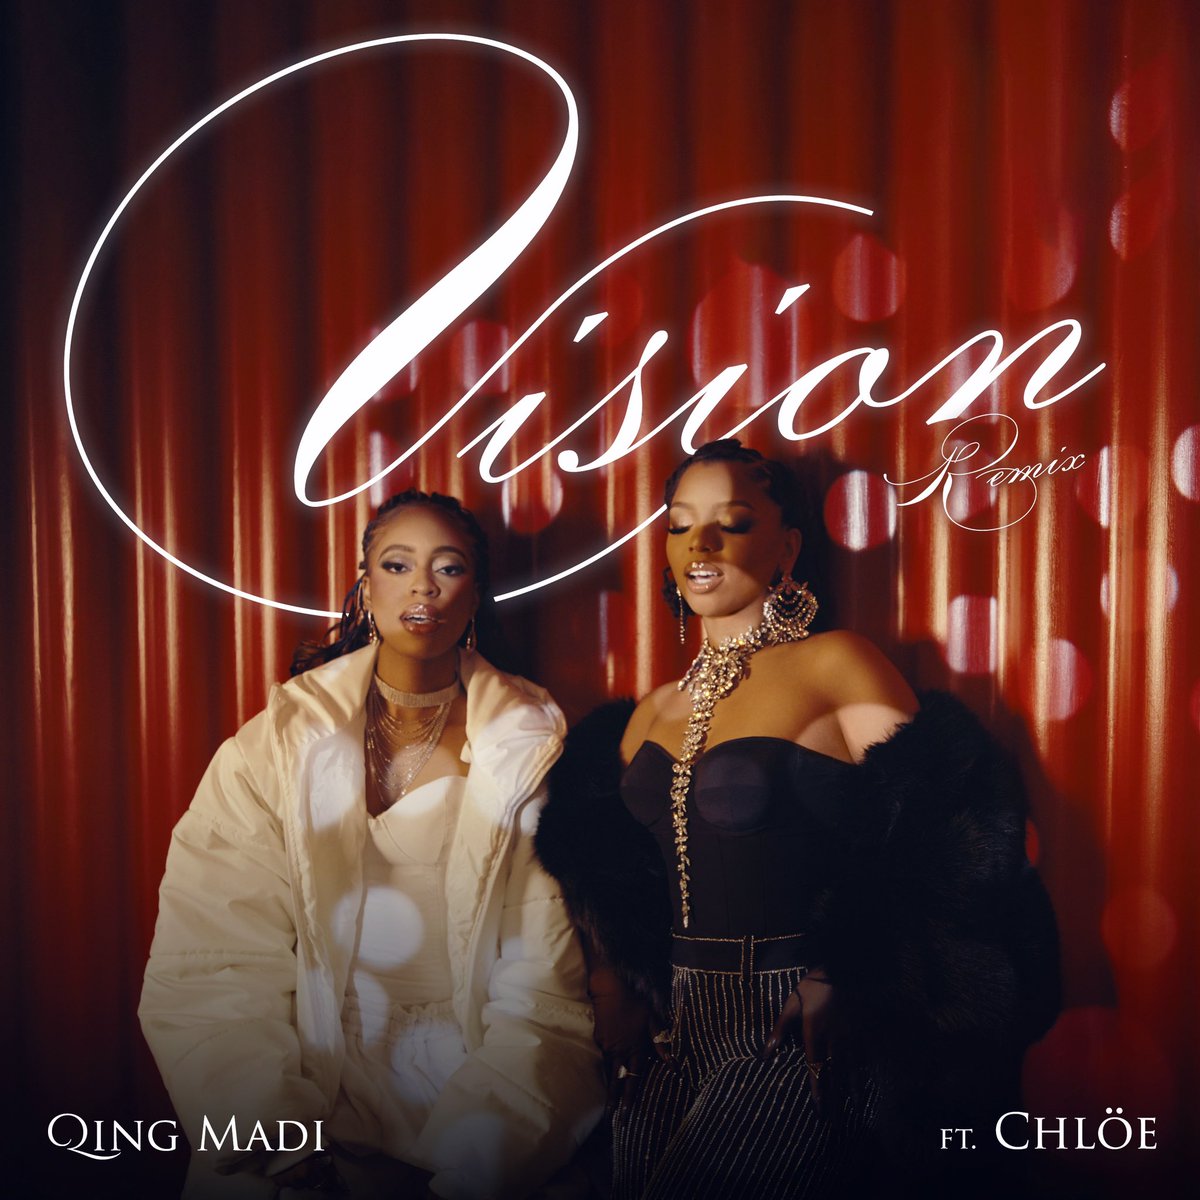 Qing Madi featured Chloe Bailey on Vision jam and I must say it is a really good banger. Cc: @Qingmadi, @ChloeBailey